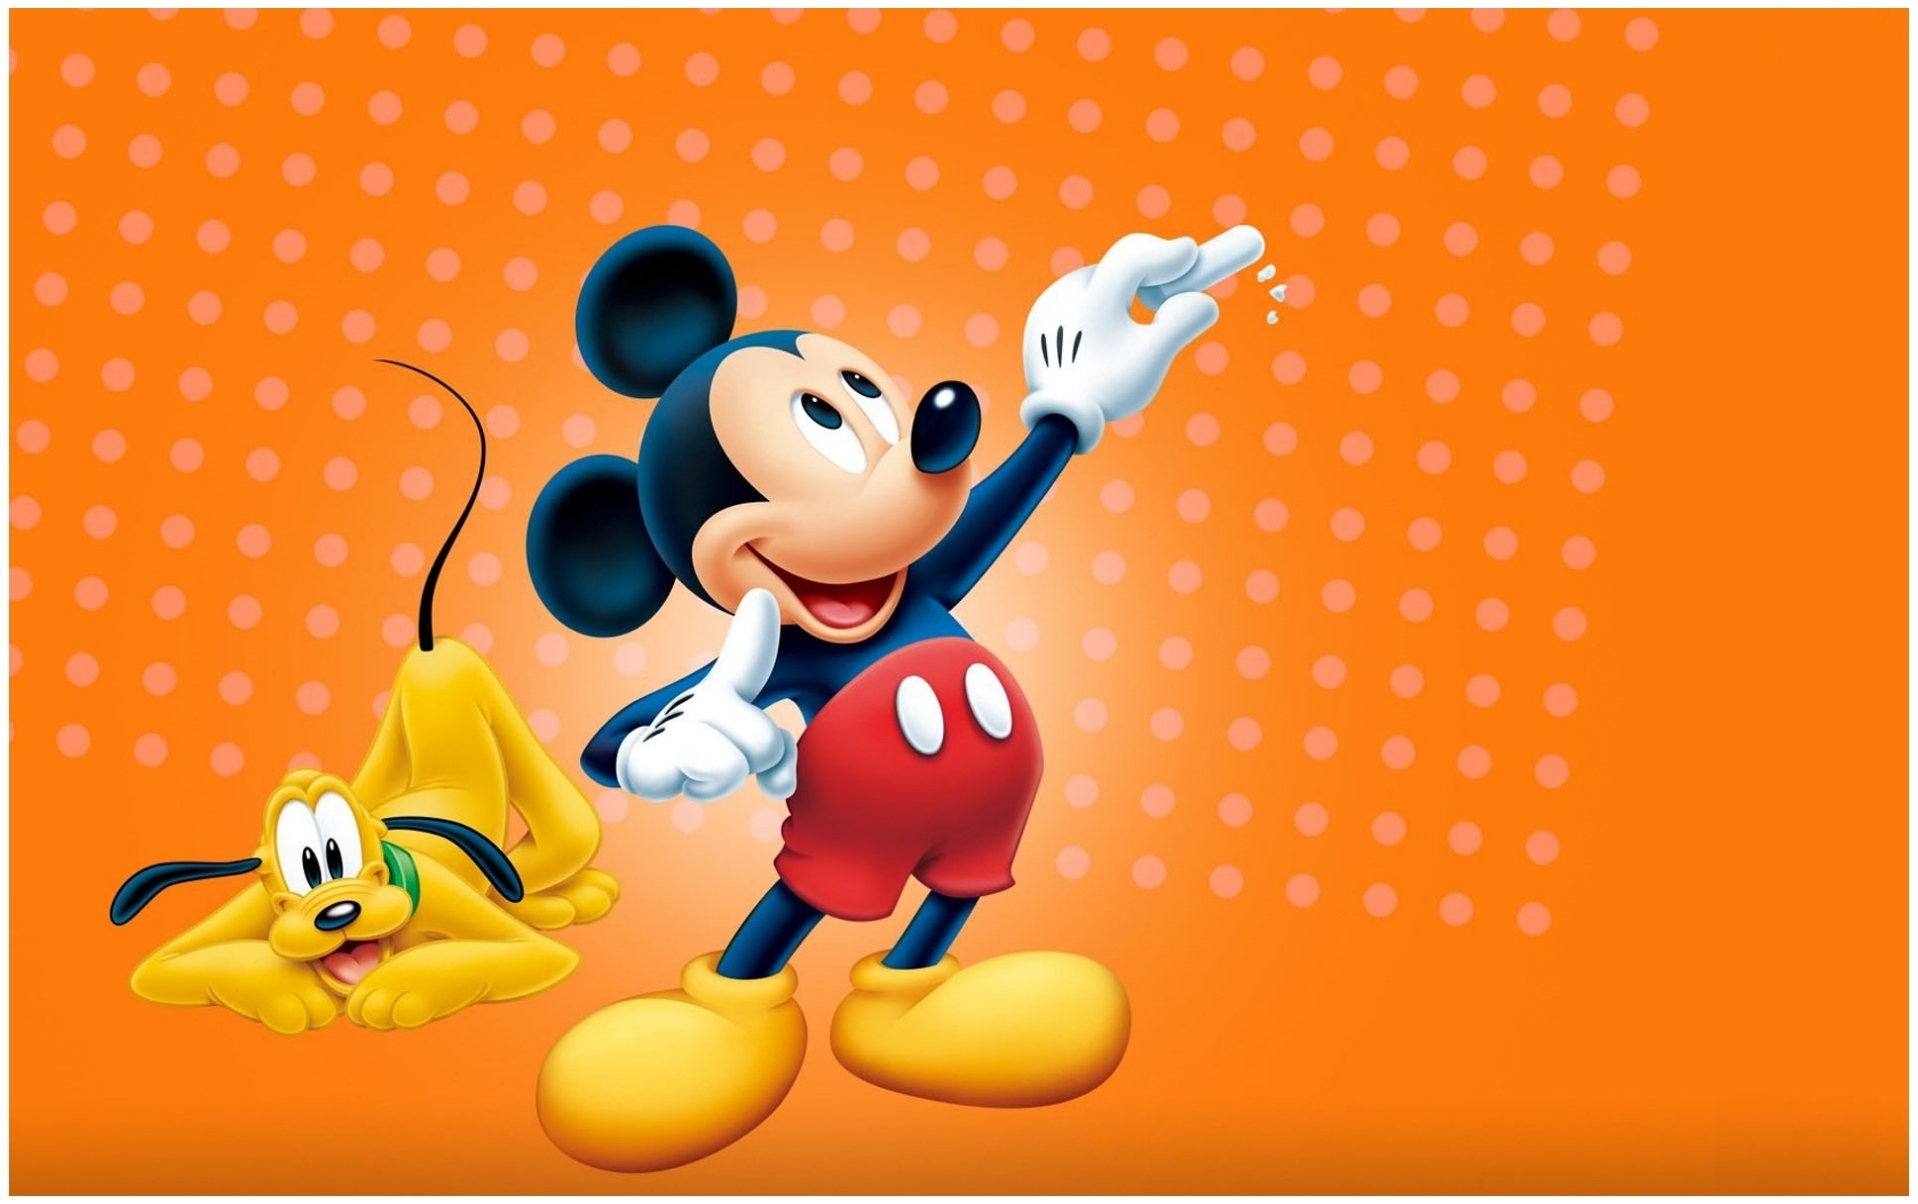 mickey mouse Cartoon wallpaper free download